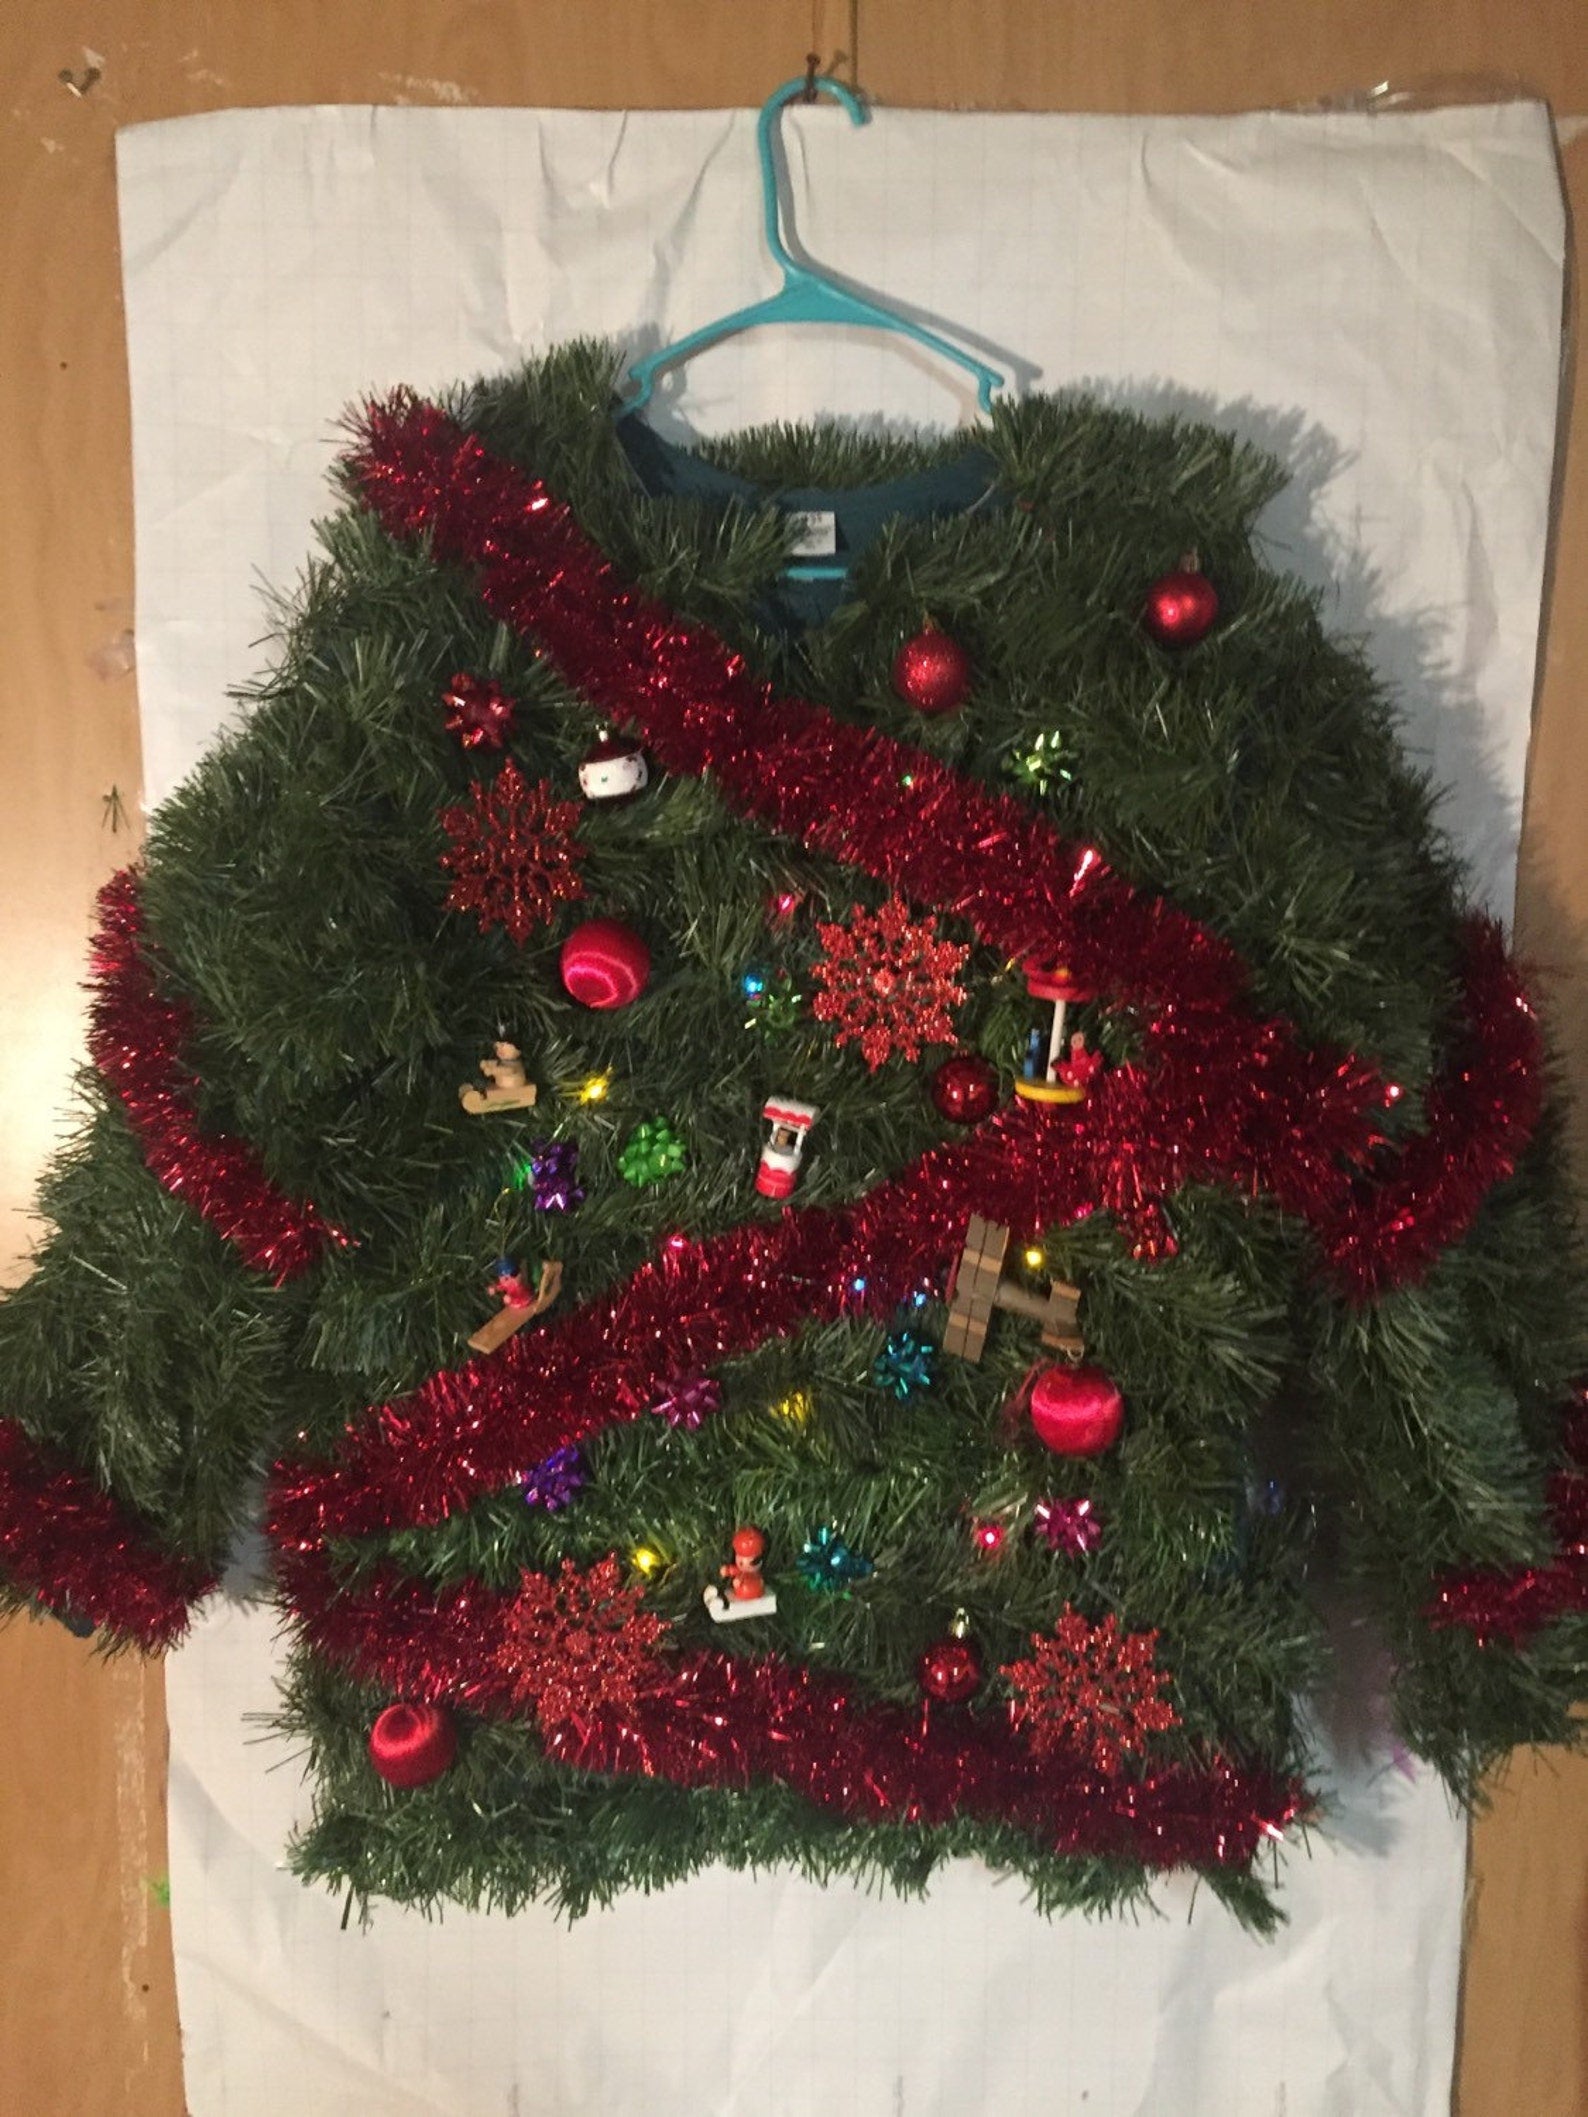 How to Be Completely Heinous (or Surprisingly Classy) at Your Next Ugly Sweater Party